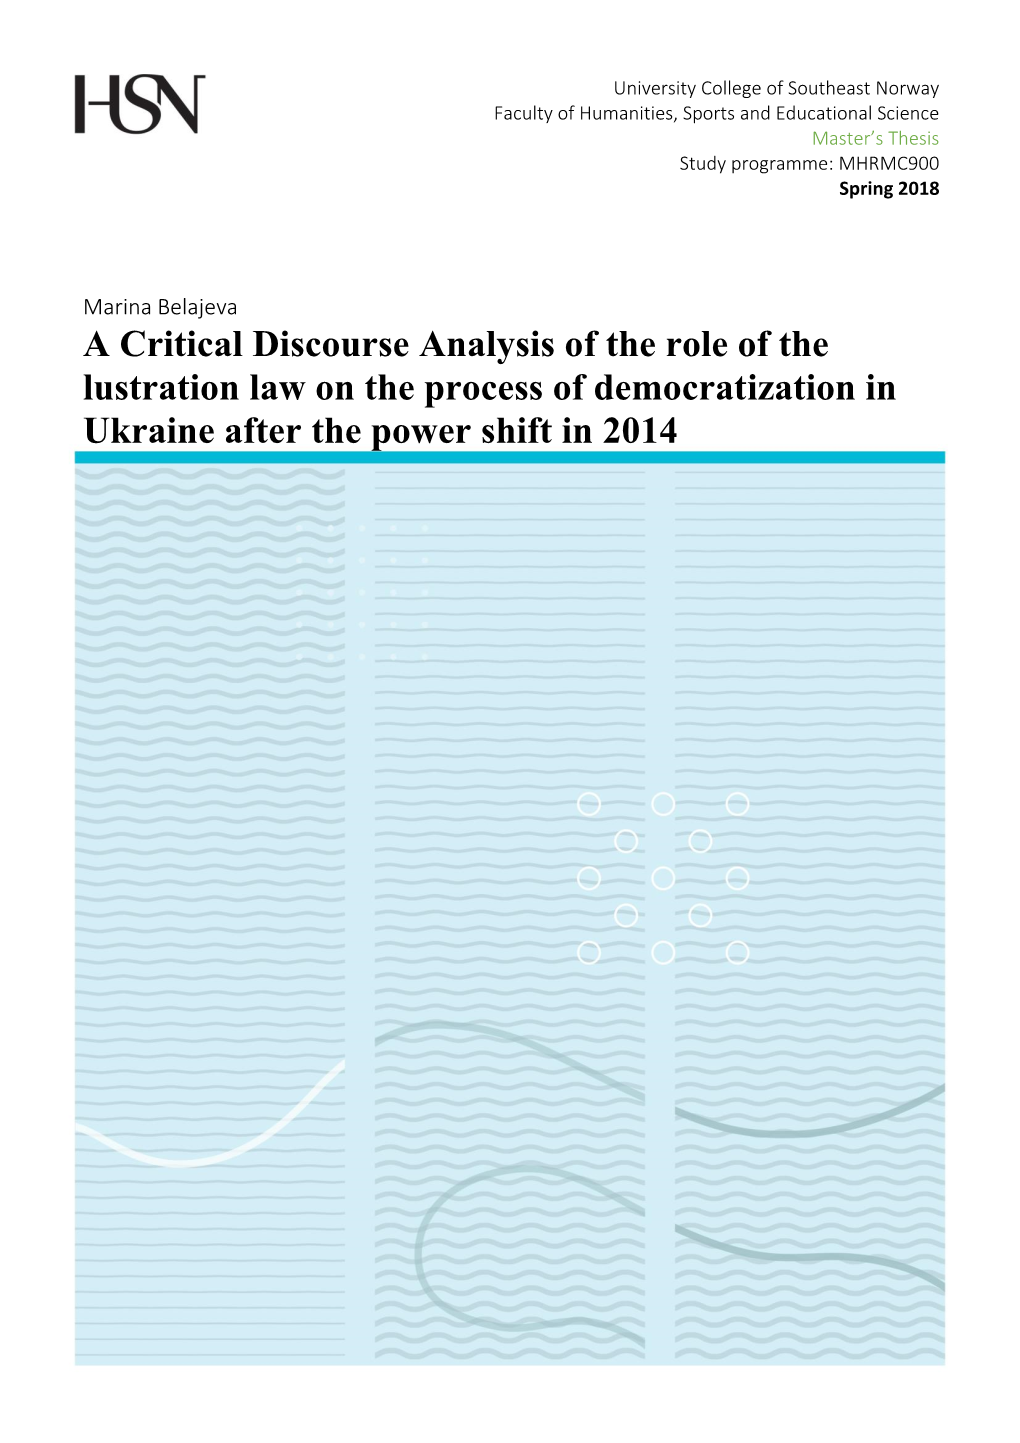 Critical Discourse Analysis of the Role of the Lustration Law on the Process of Democratization in Ukraine After the Power Shift in 2014